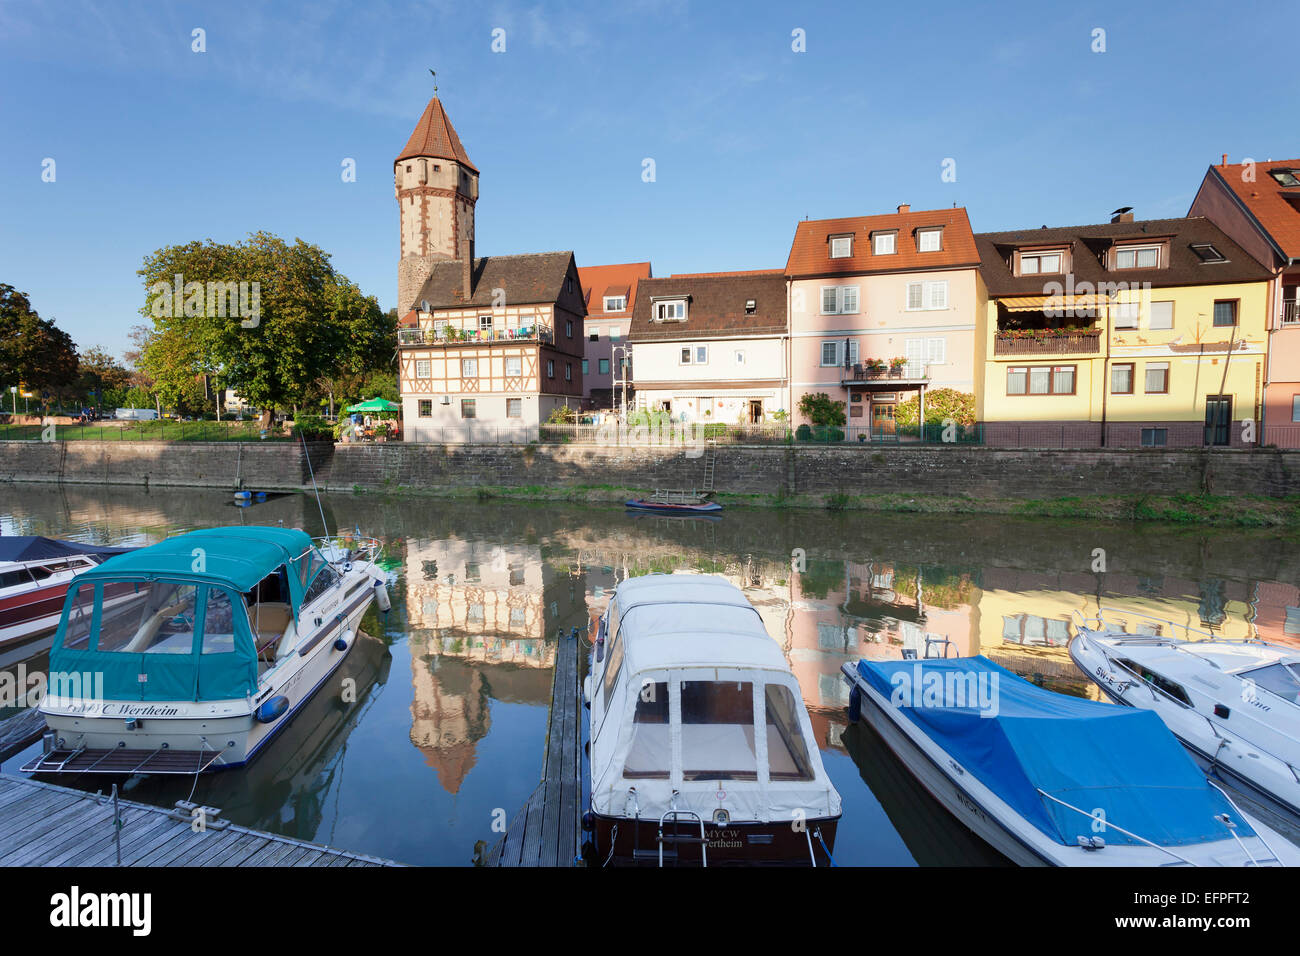 Old town with Spitzer Turm Tower, Tauber River, Wertheim, Main Tauber District, Baden-Wurttemberg, Germany, Europe Stock Photo